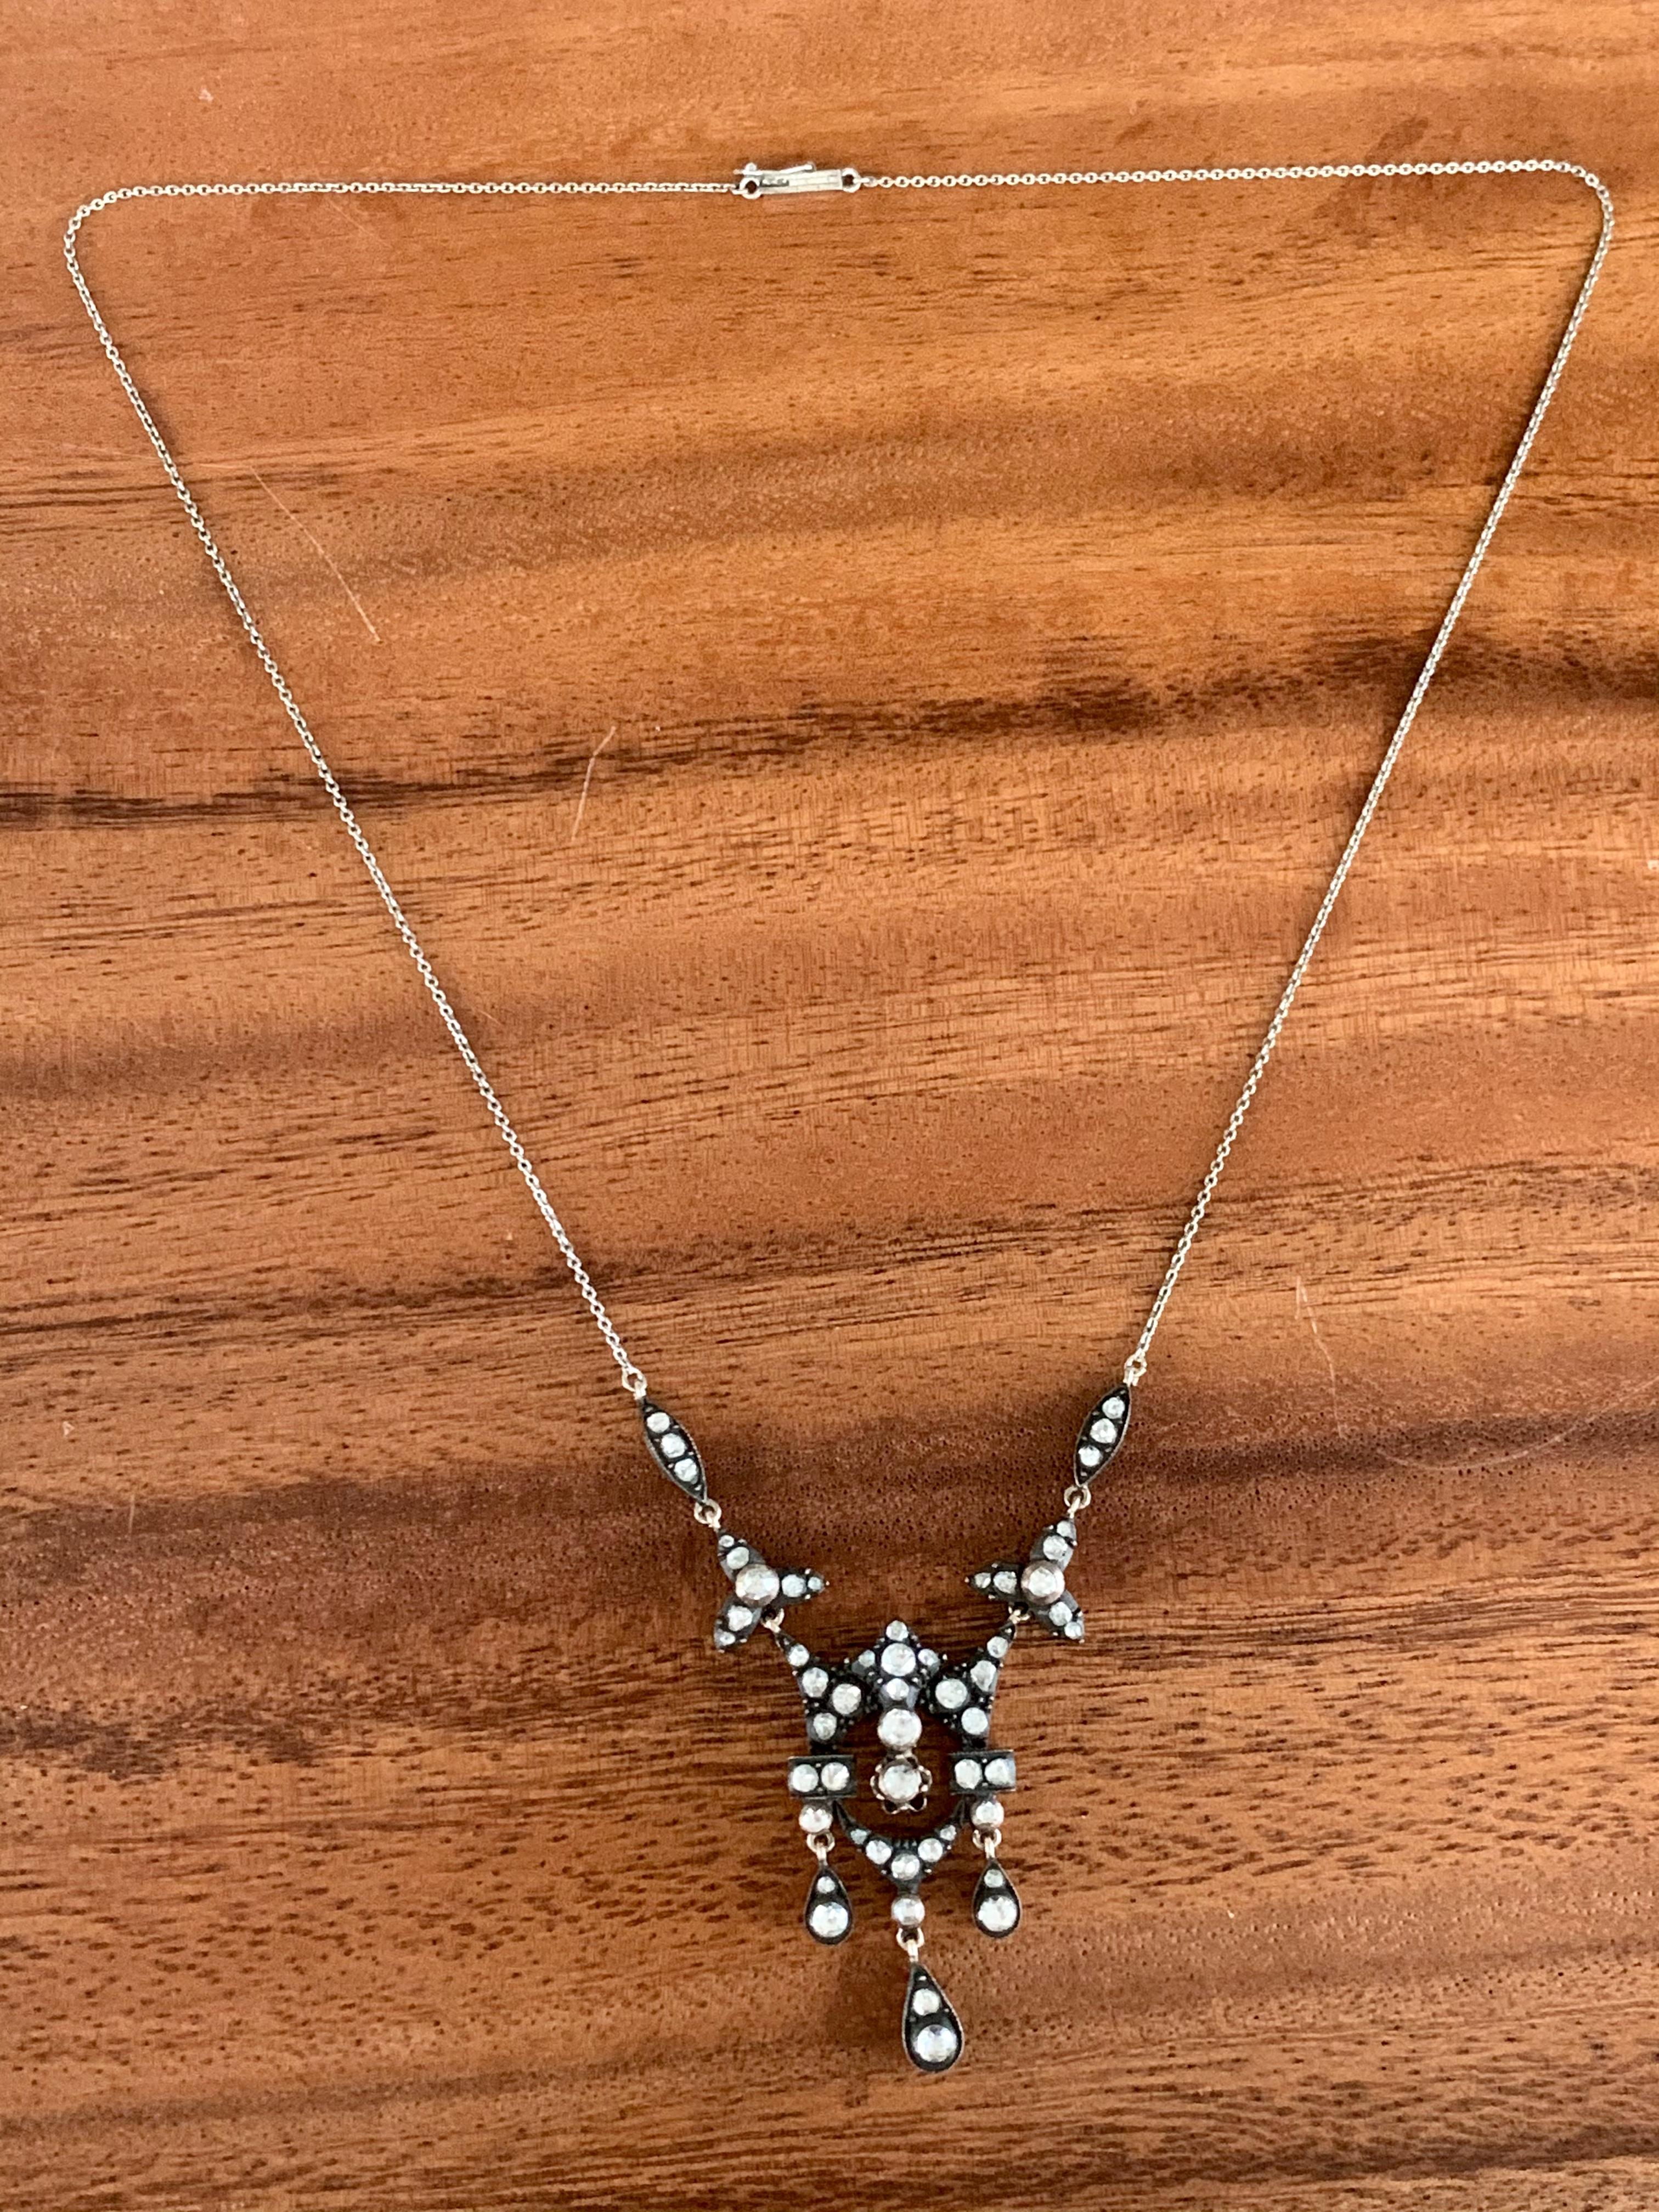 Antique Rose Cut Diamond, Platinum, Gold, and Silver Necklace For Sale 5